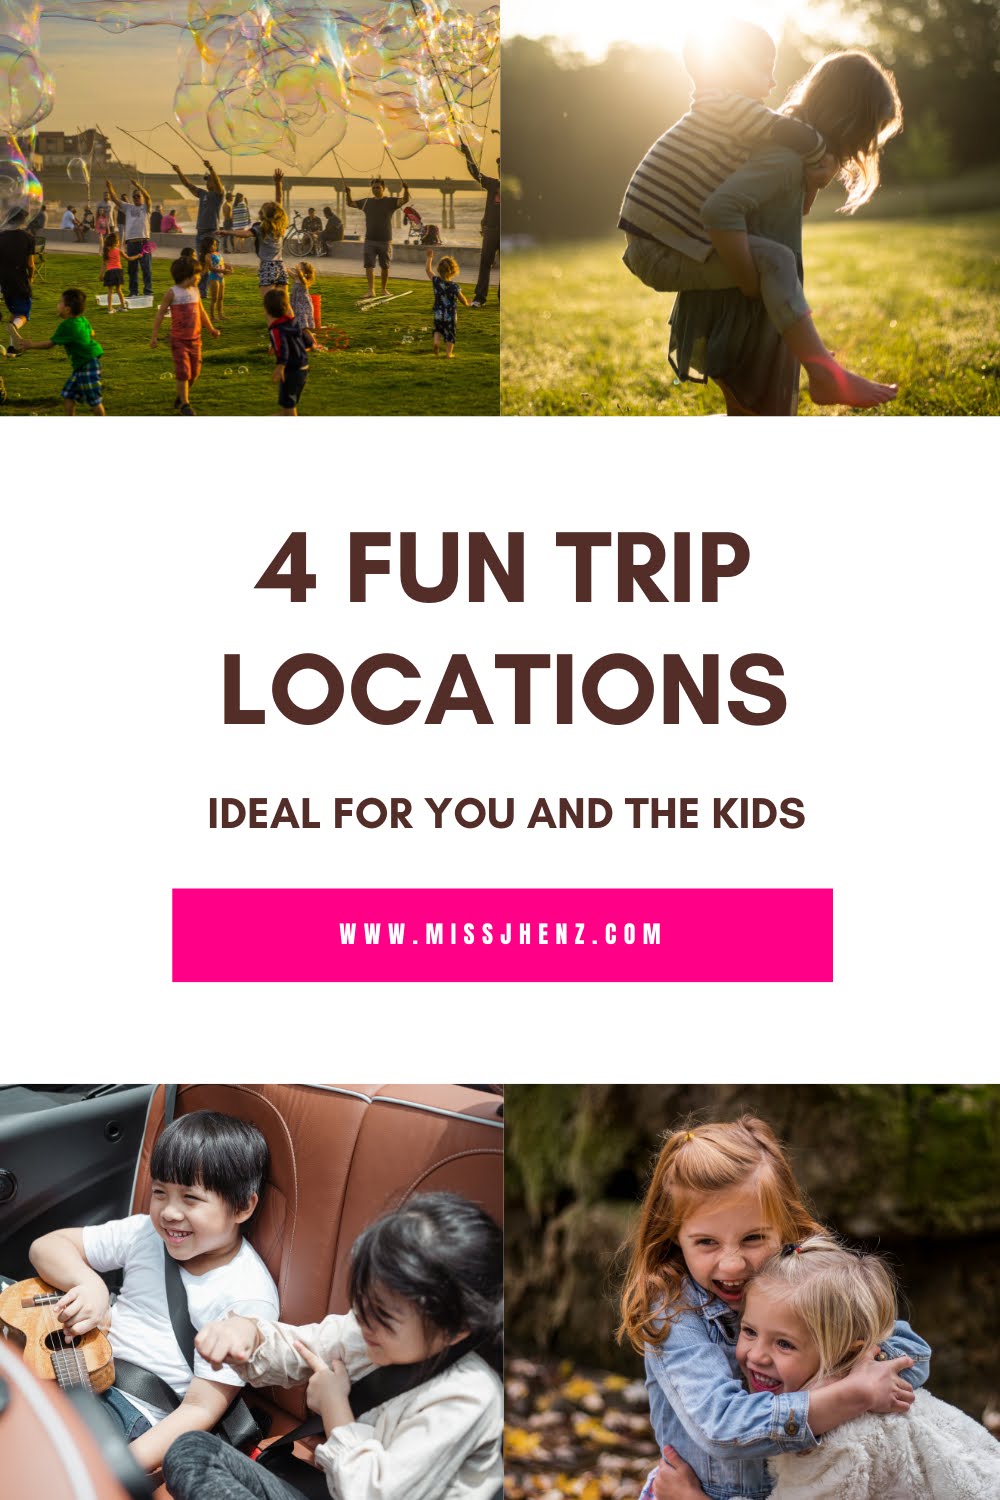 4 Fun Trip Locations Ideal For You And The Kids